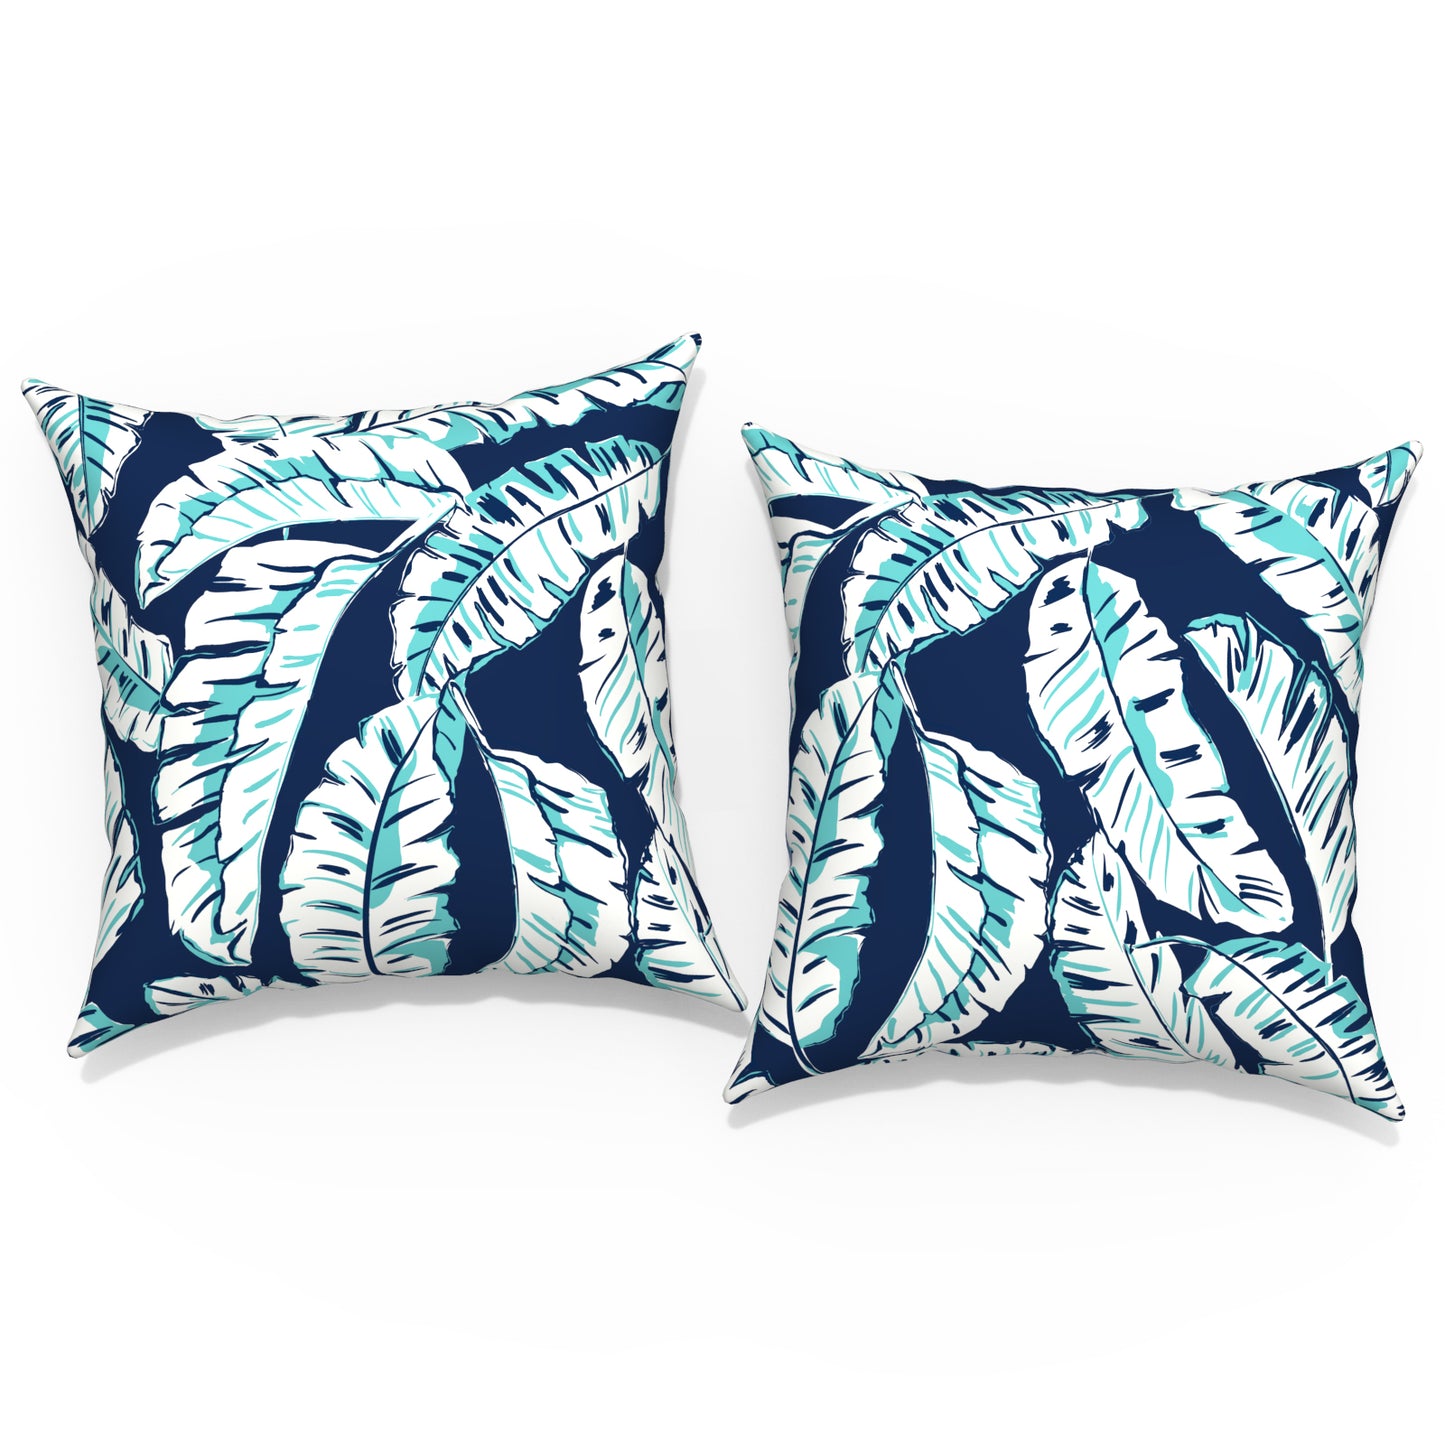 Melody Elephant Outdoor Throw Pillows with Inners, All Weather patio pillows set of 2, Square pillows Decorative for  home garden furniture, 20x20 Inch, Baltic Palms White